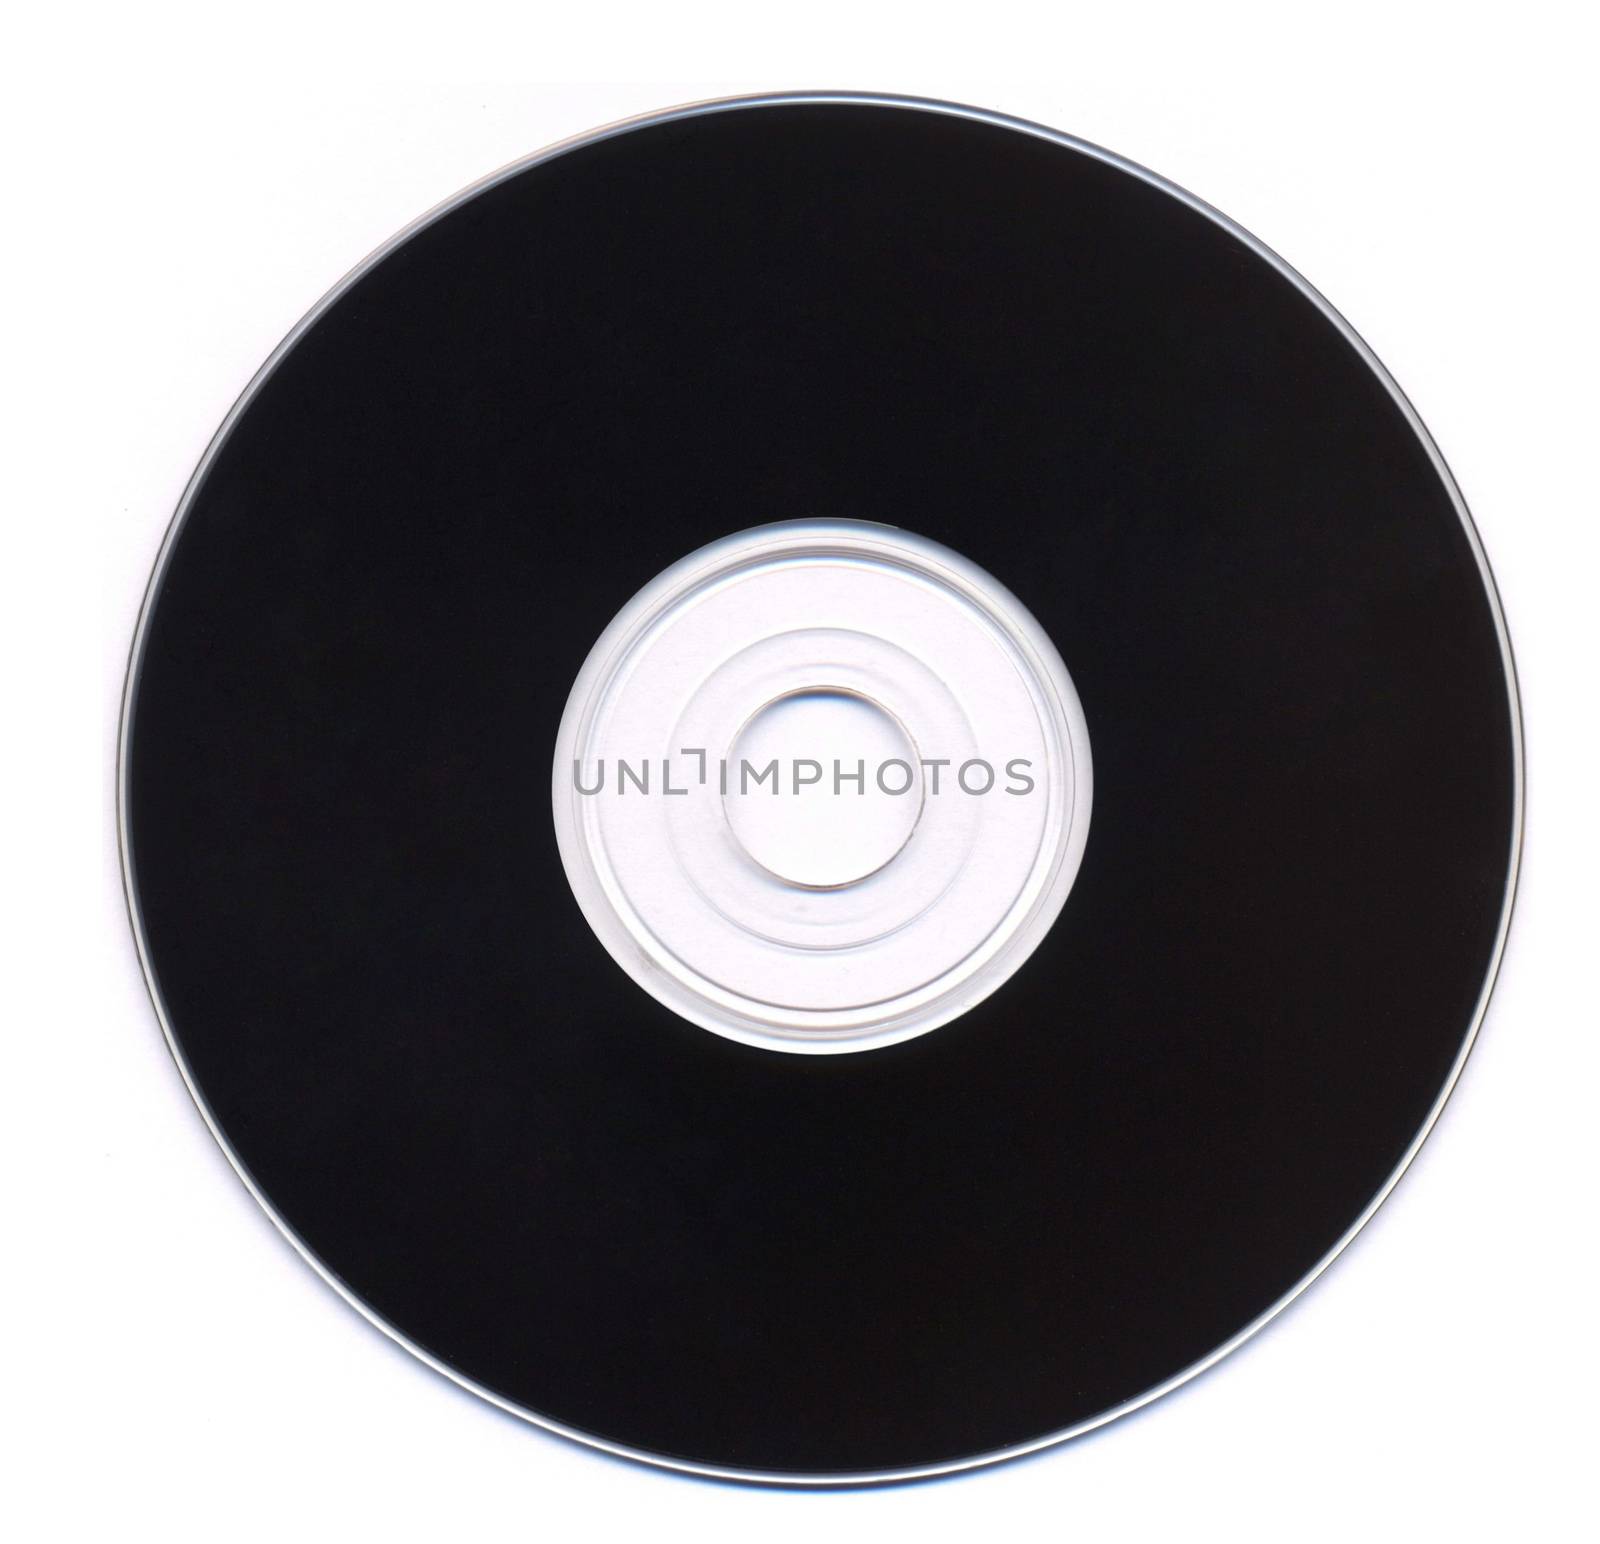 Black vinyl record isolated on white background by ozaiachin